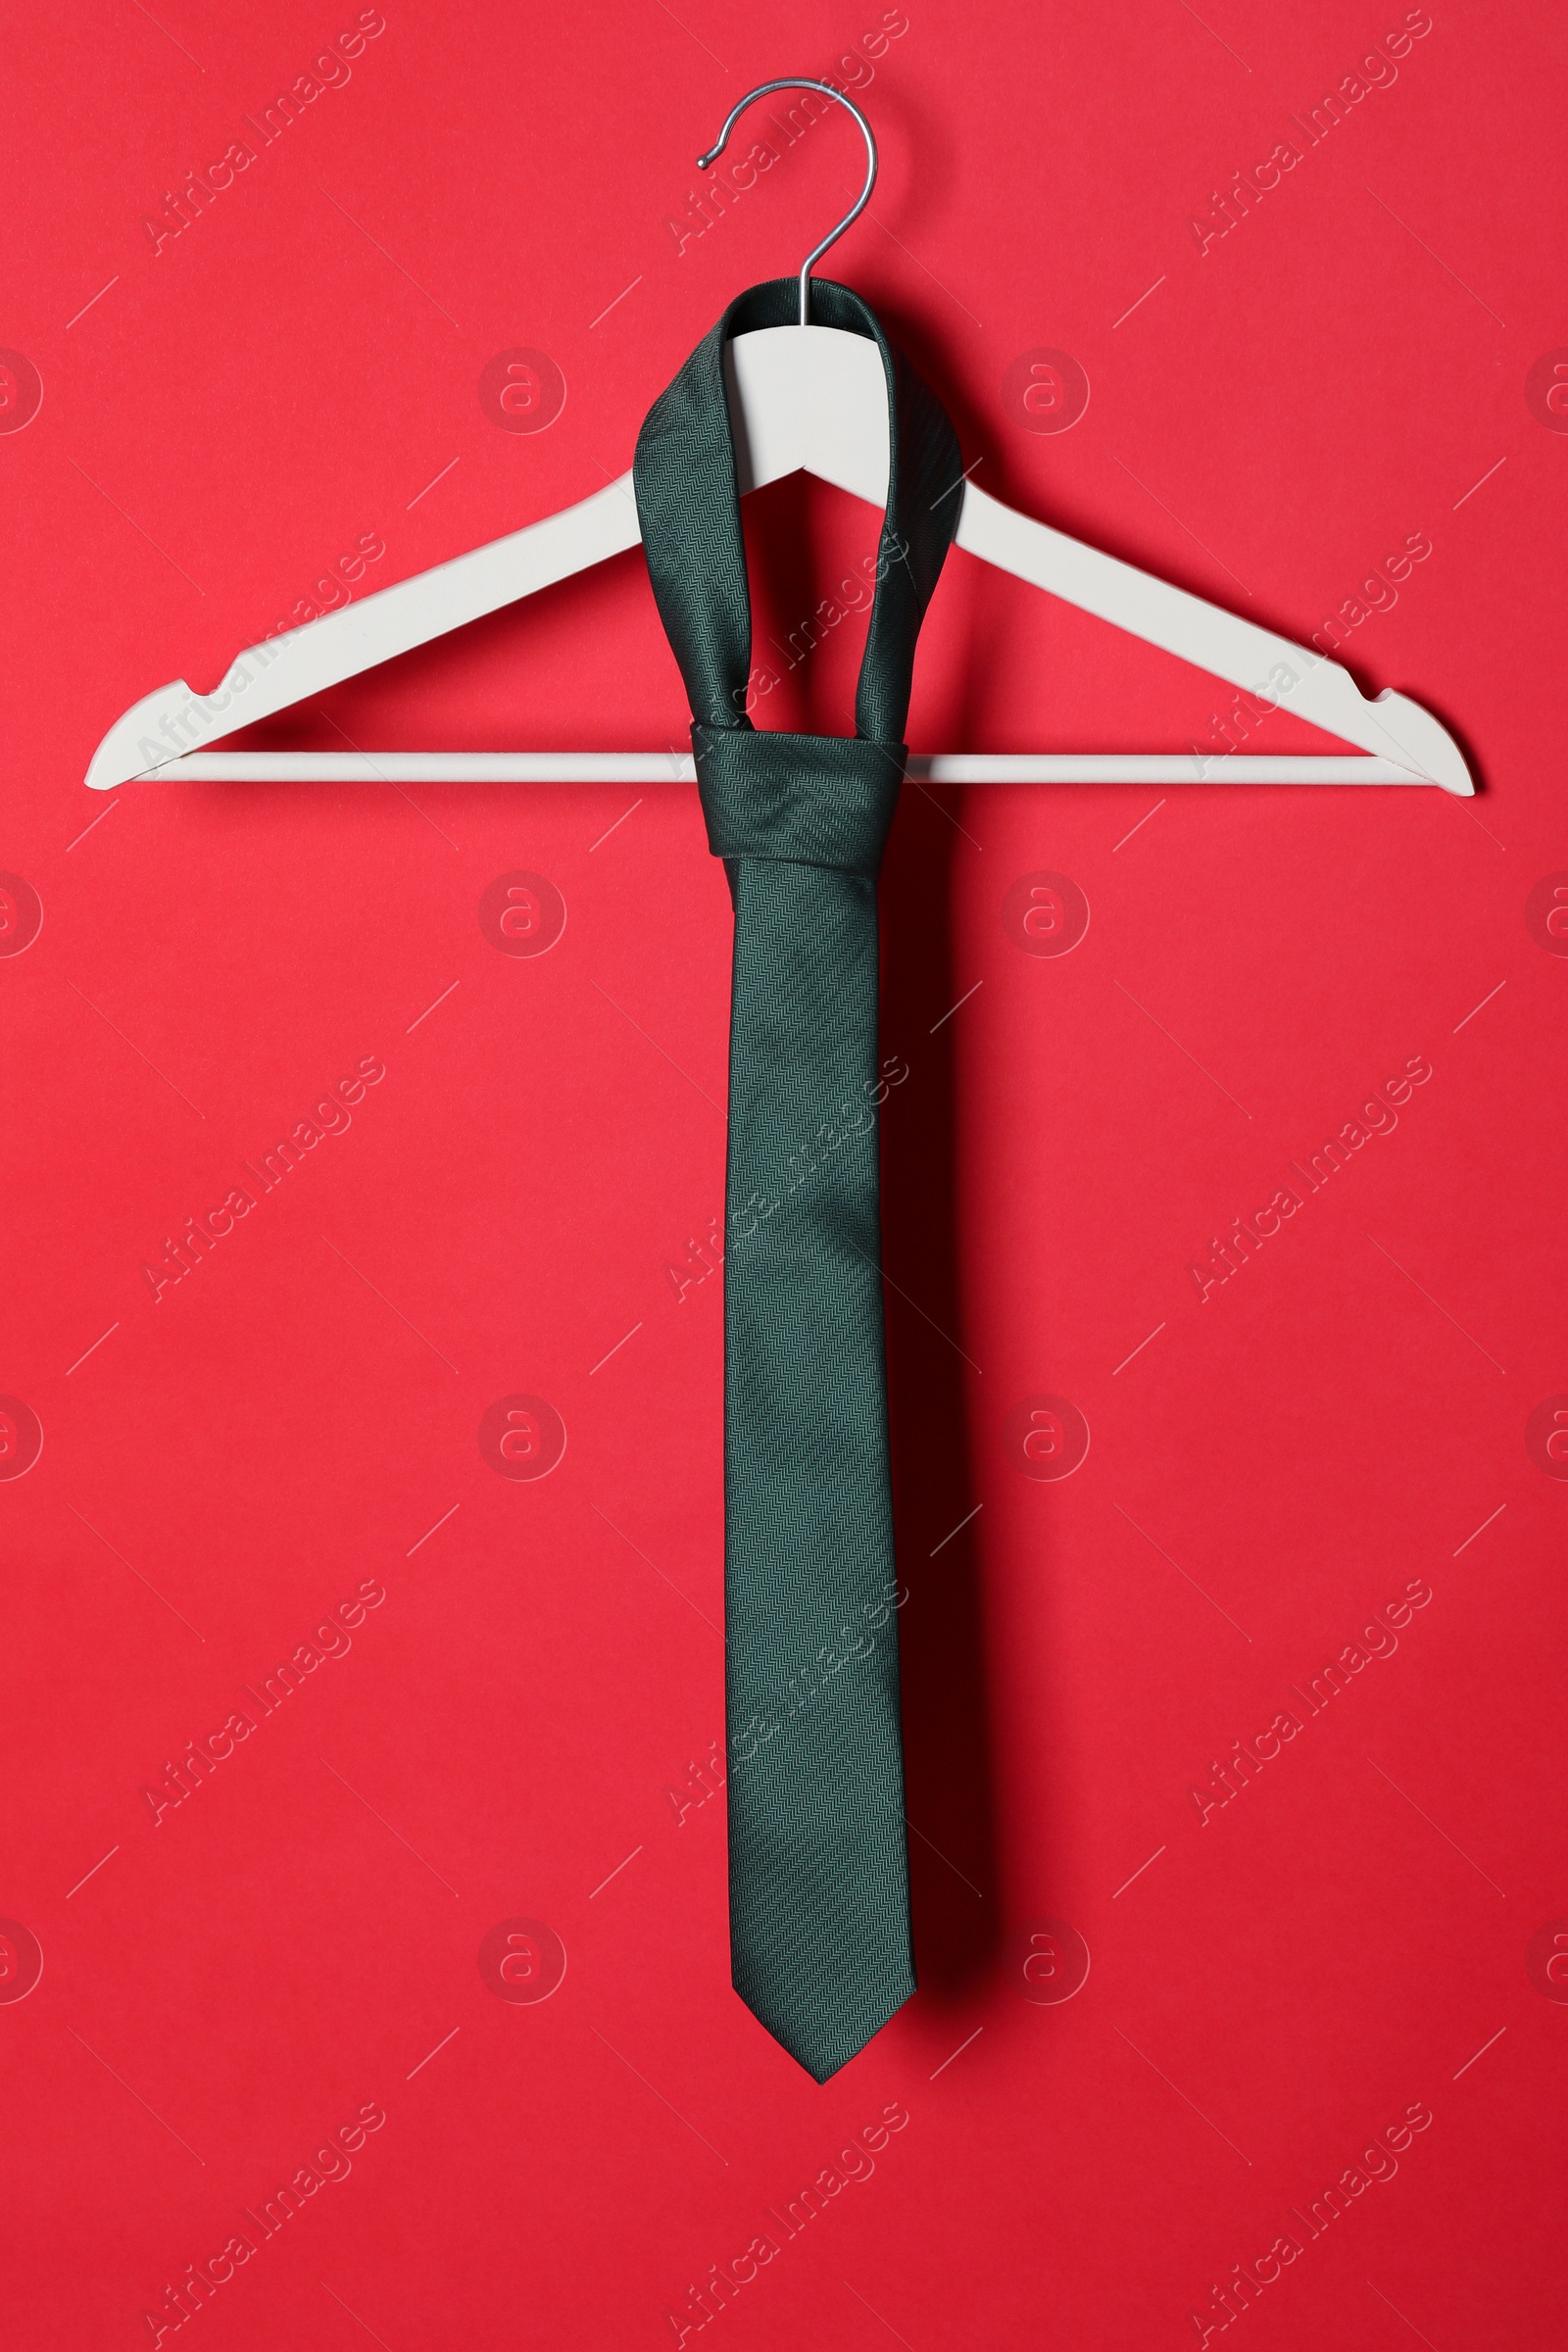 Photo of Hanger with black tie on red background